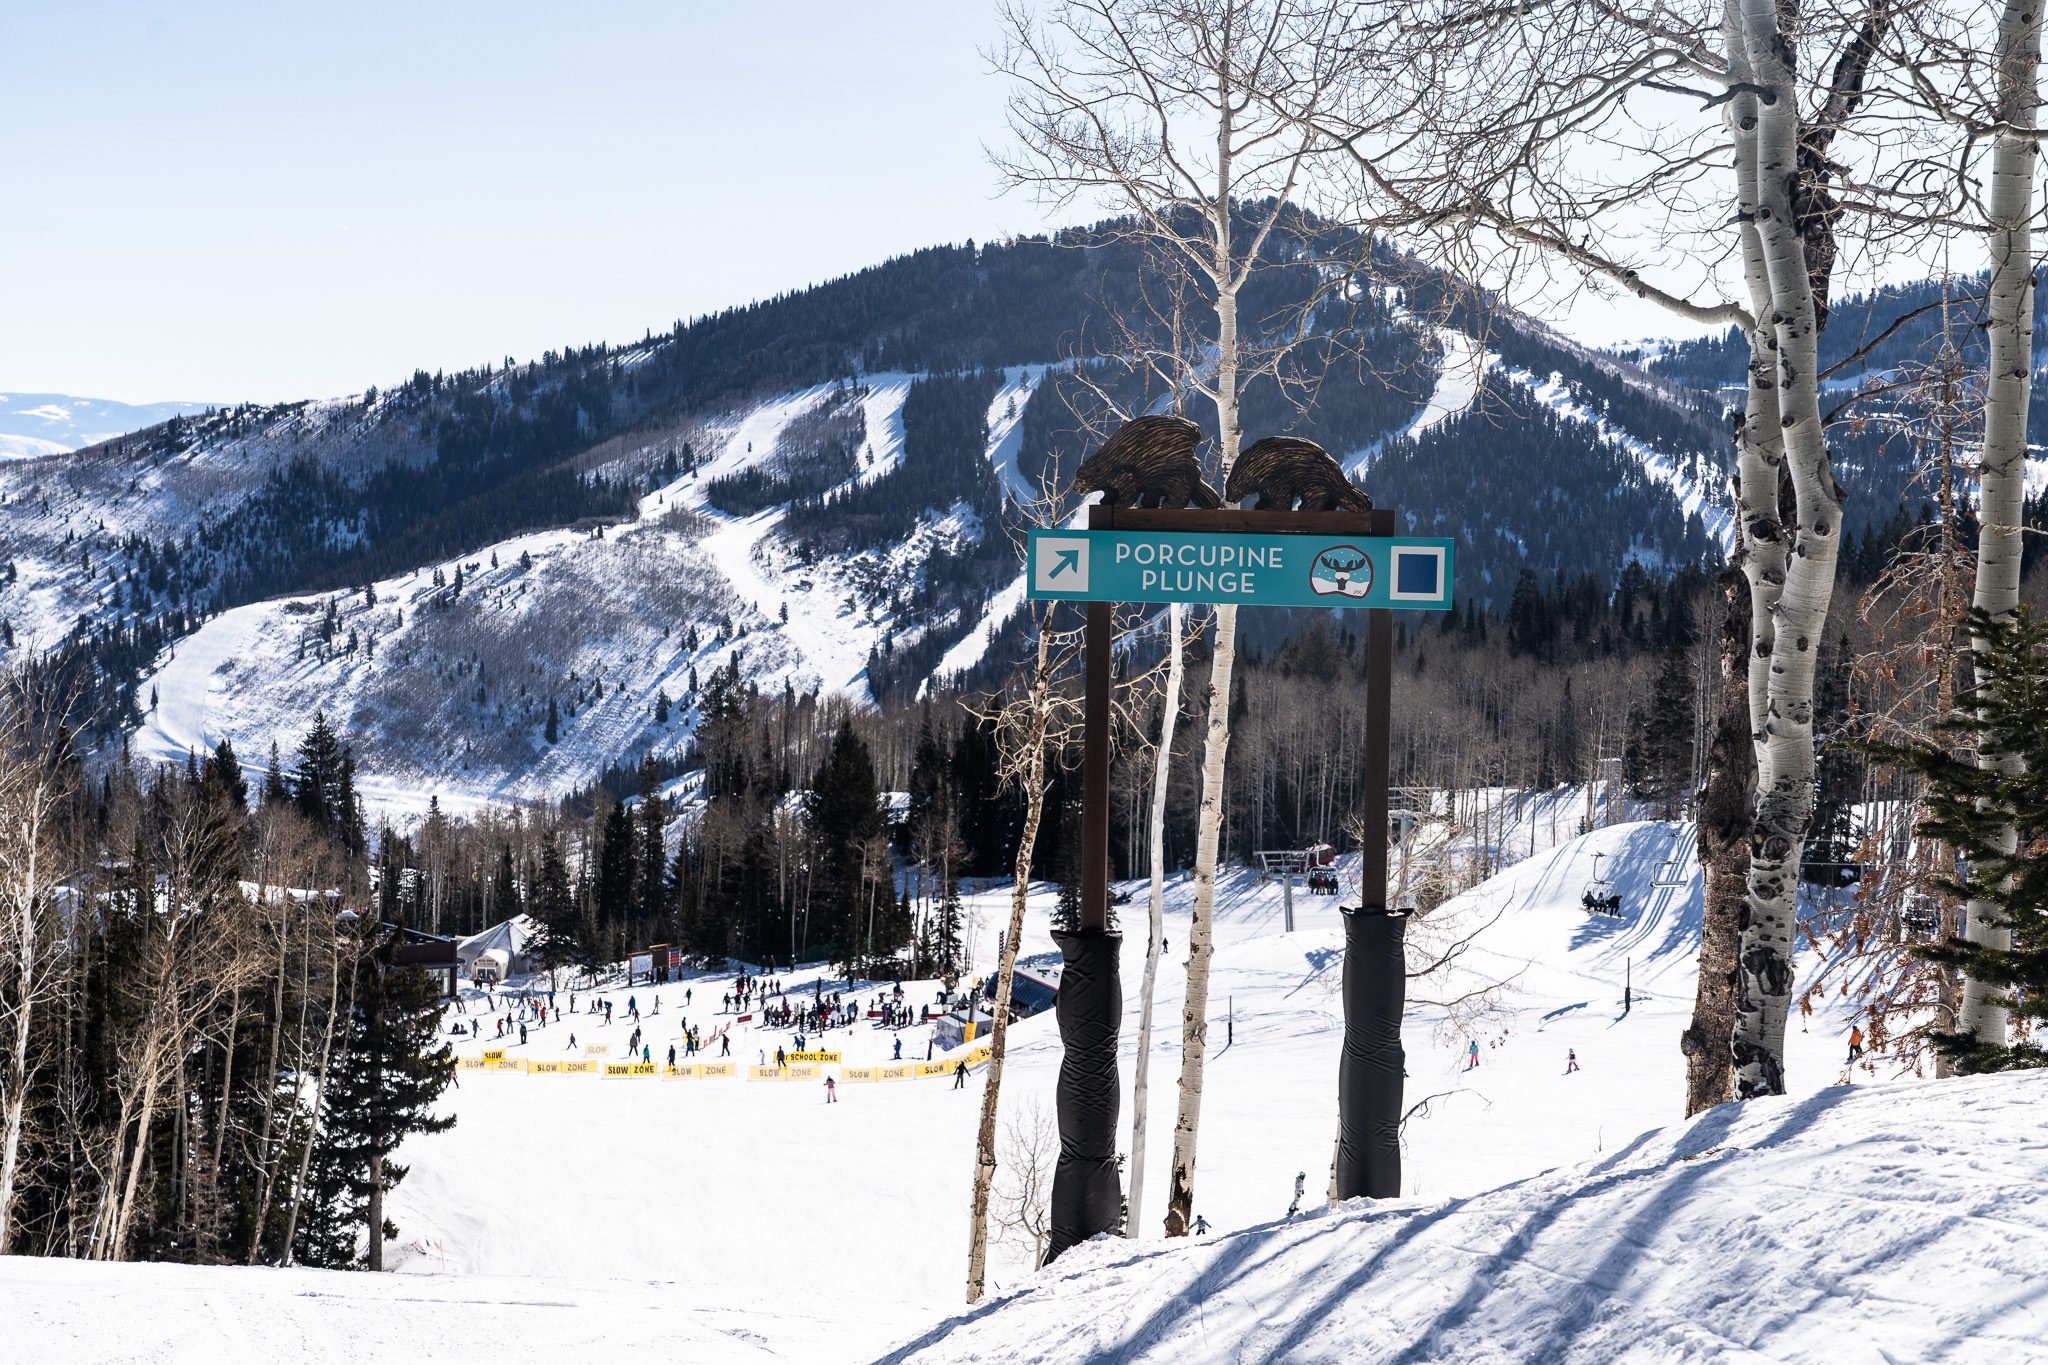 Porcupine Plunge ski run as part of High Meadow Park at Park City Mountain.